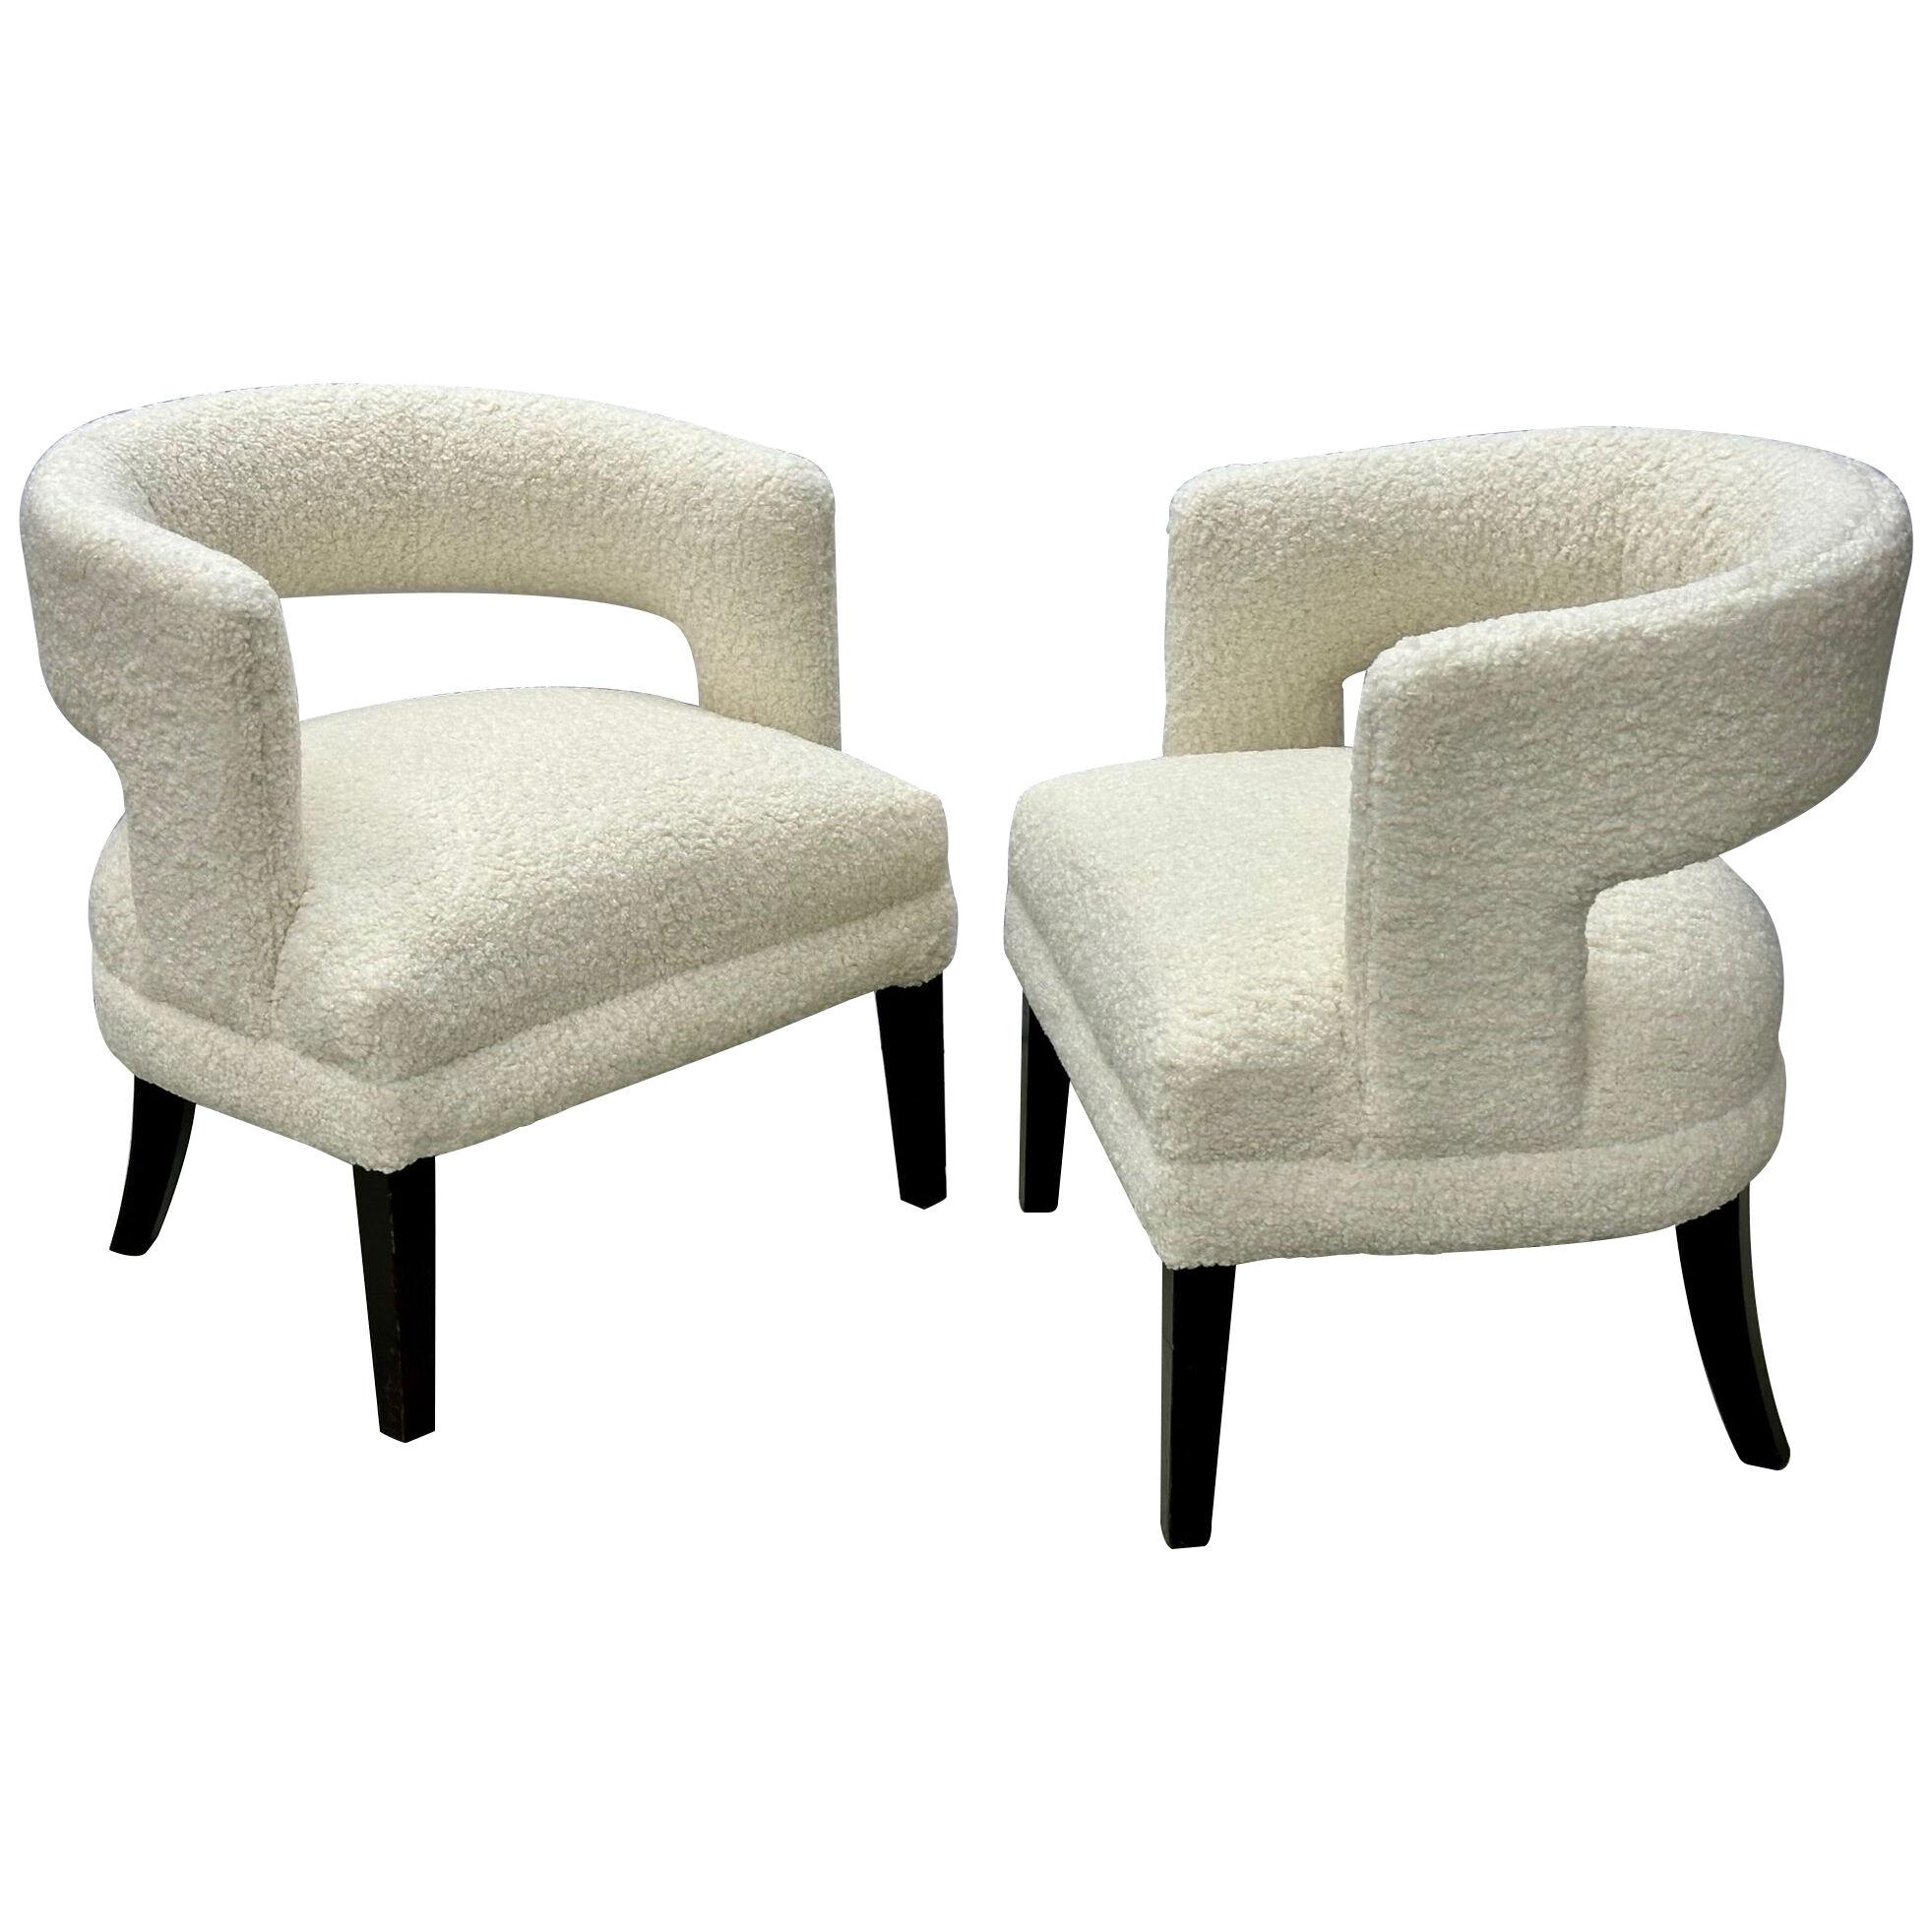 Pair of Open Back Mid-Century Modern Lounge Chairs, American, Boucle / Fur